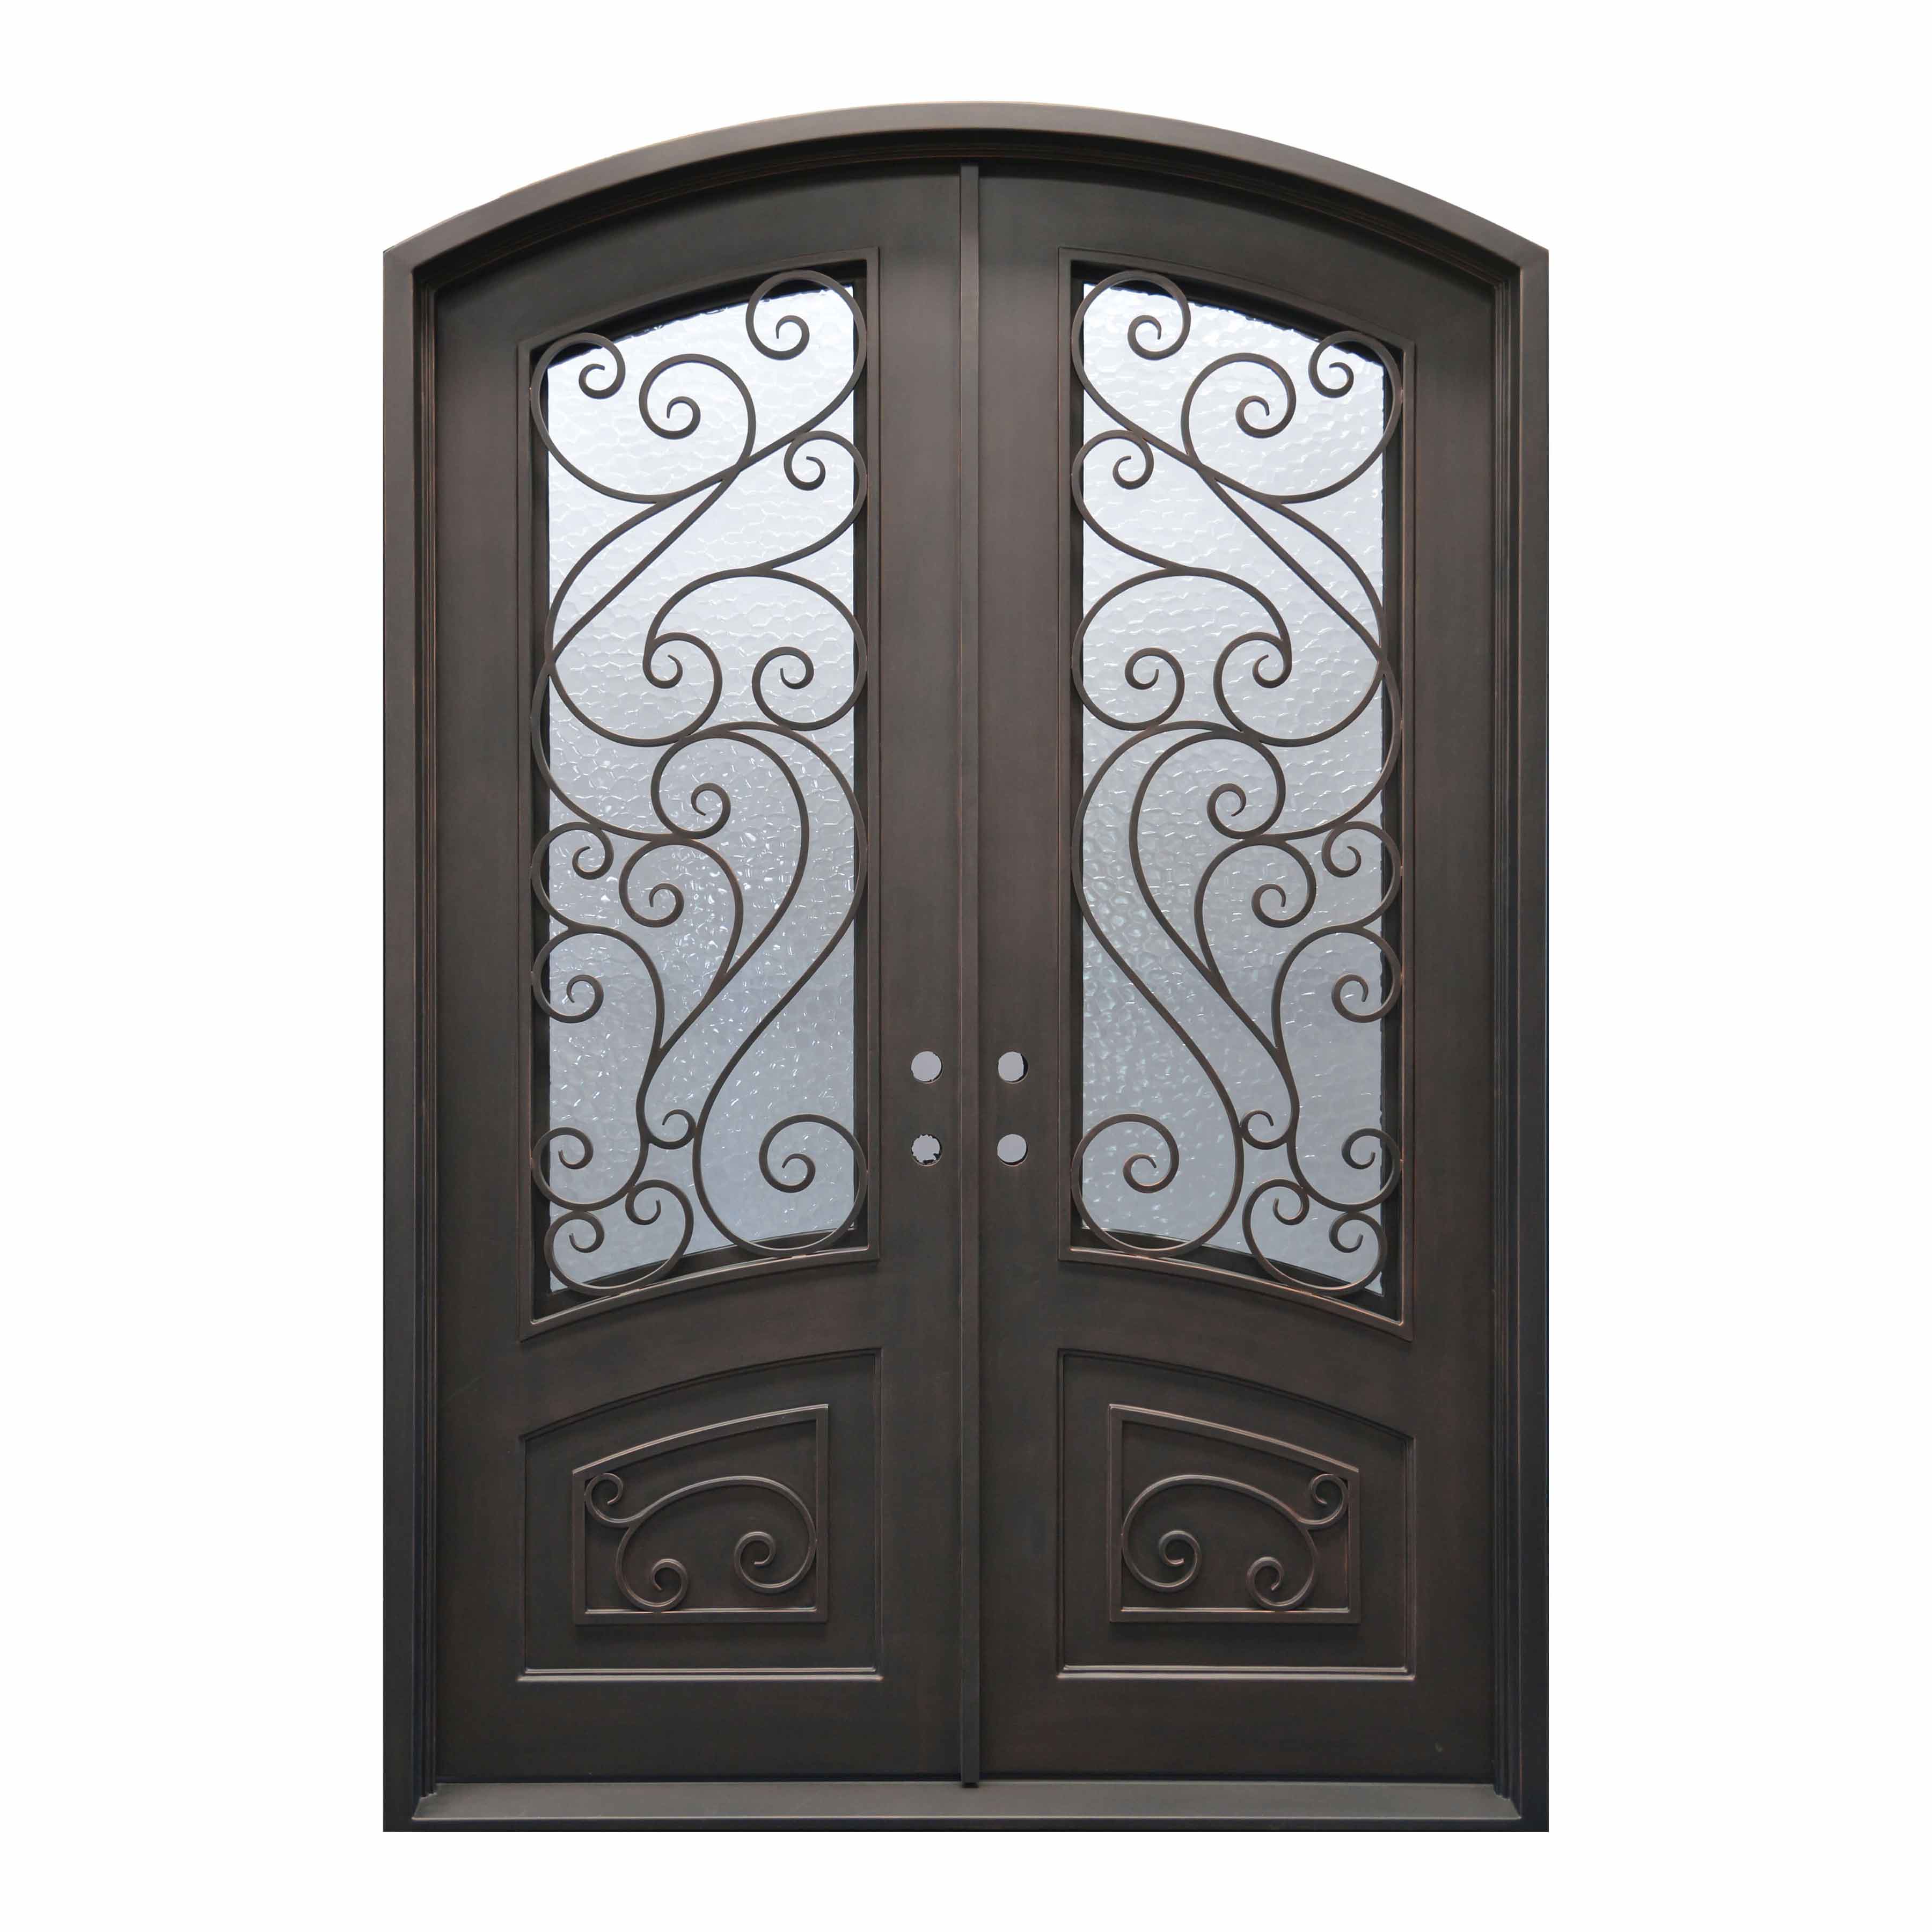 thermal break bronze forged iron double door with fancy scrollwork